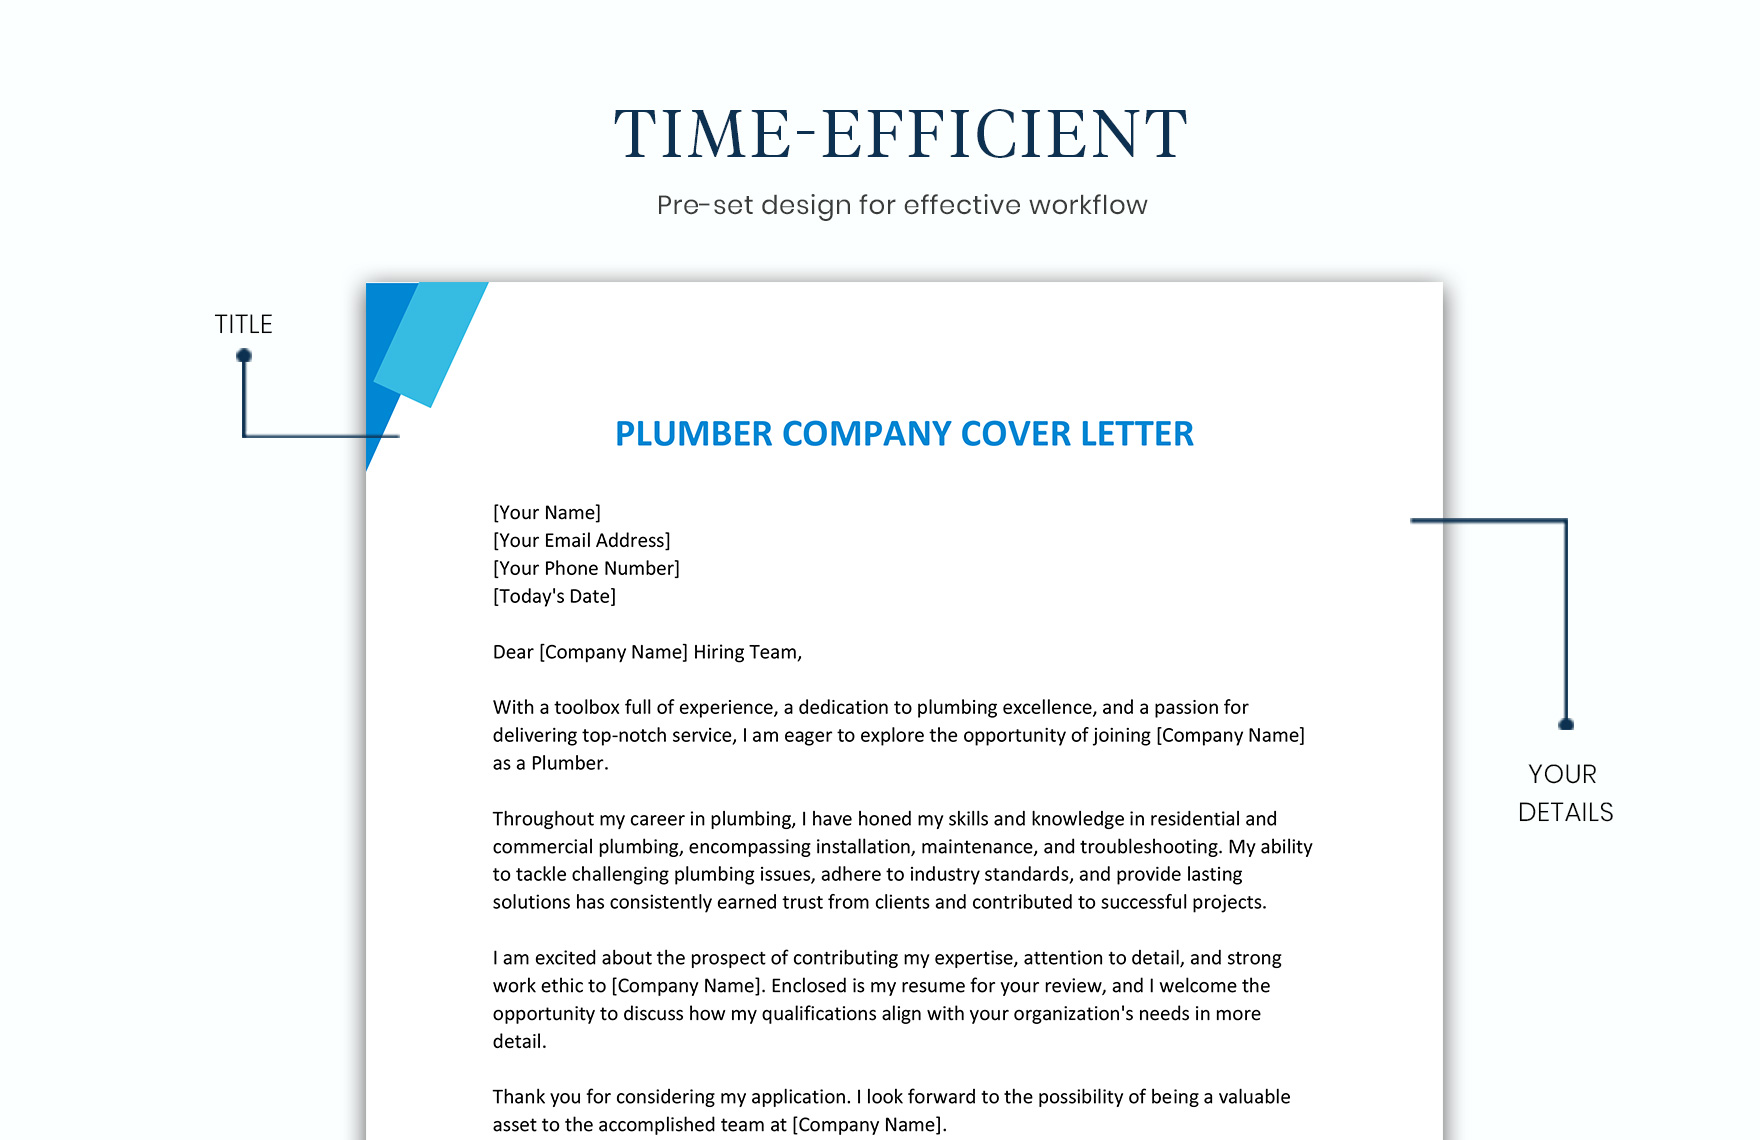 Plumber Company Cover Letter